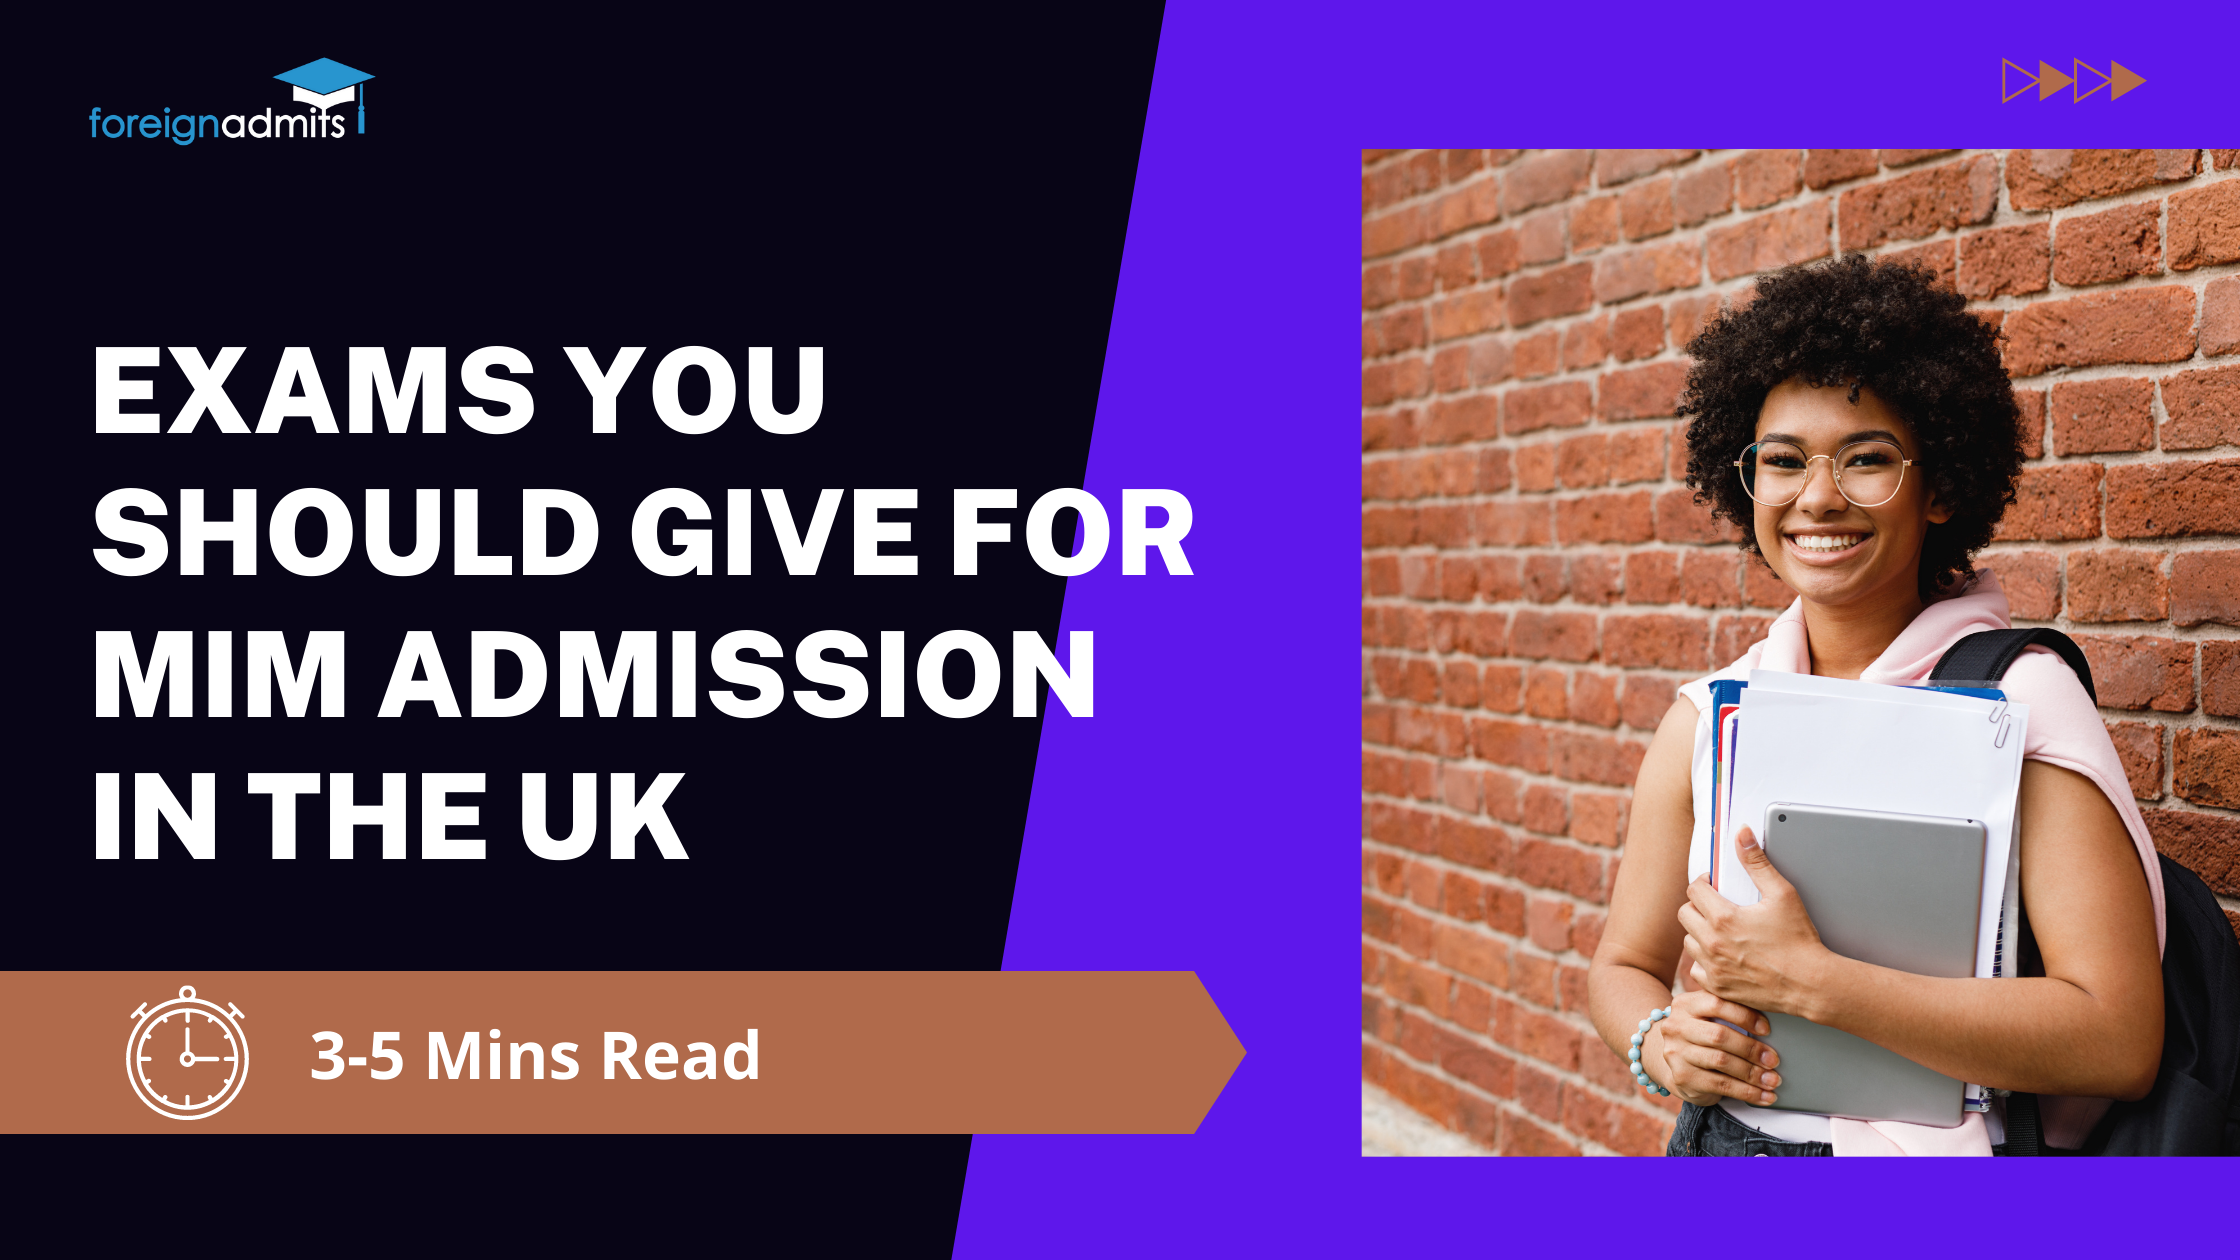 Appear for these exams to take MIM admission in the UK